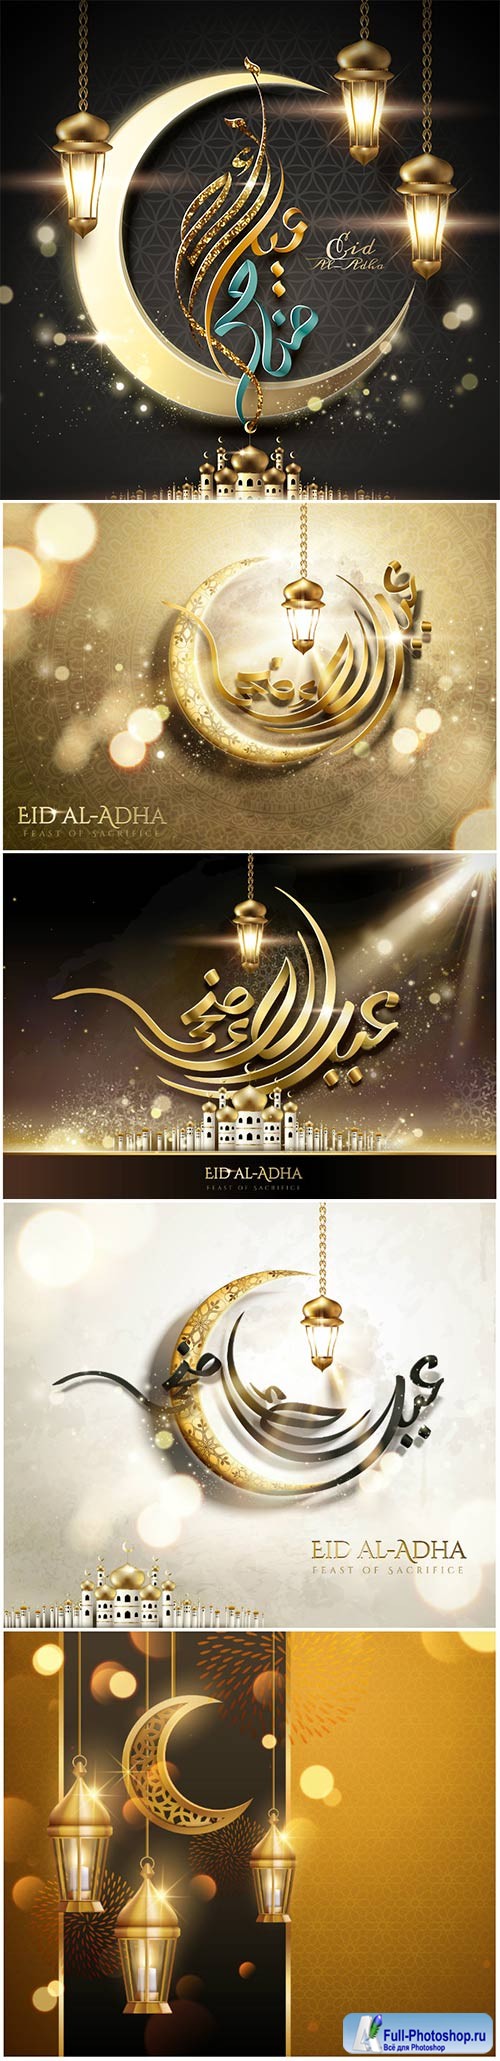 Eid al-adha calligraphy card vector design with hanging lanterns, golden crescent with floral pattern